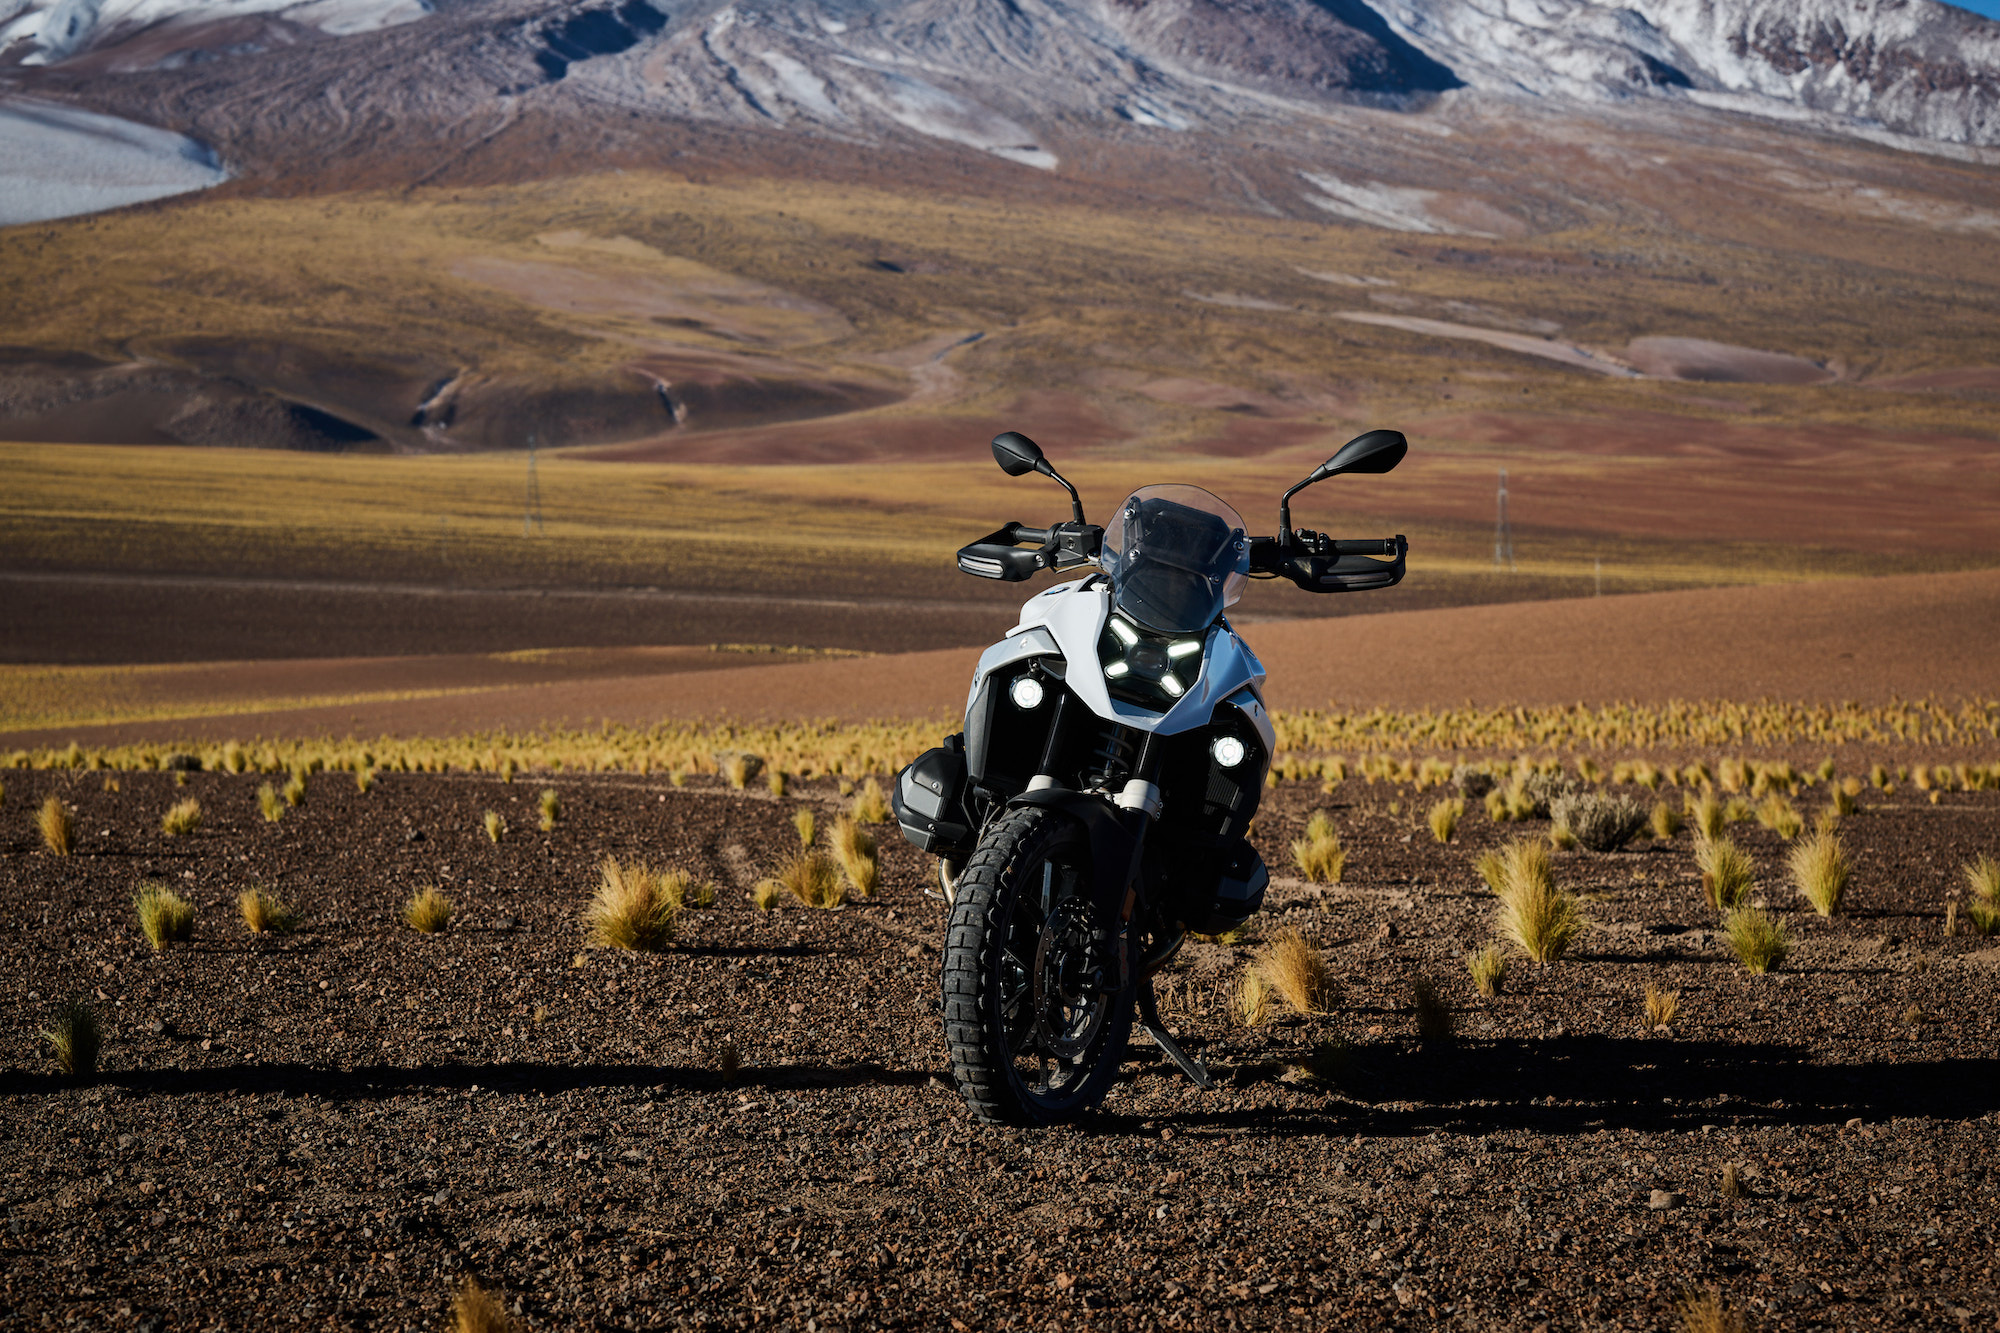 A view of BMW's all-new R 1300 GS, which houses the brand's most powerful boxer ever. All media provided by BMW Motorrad.